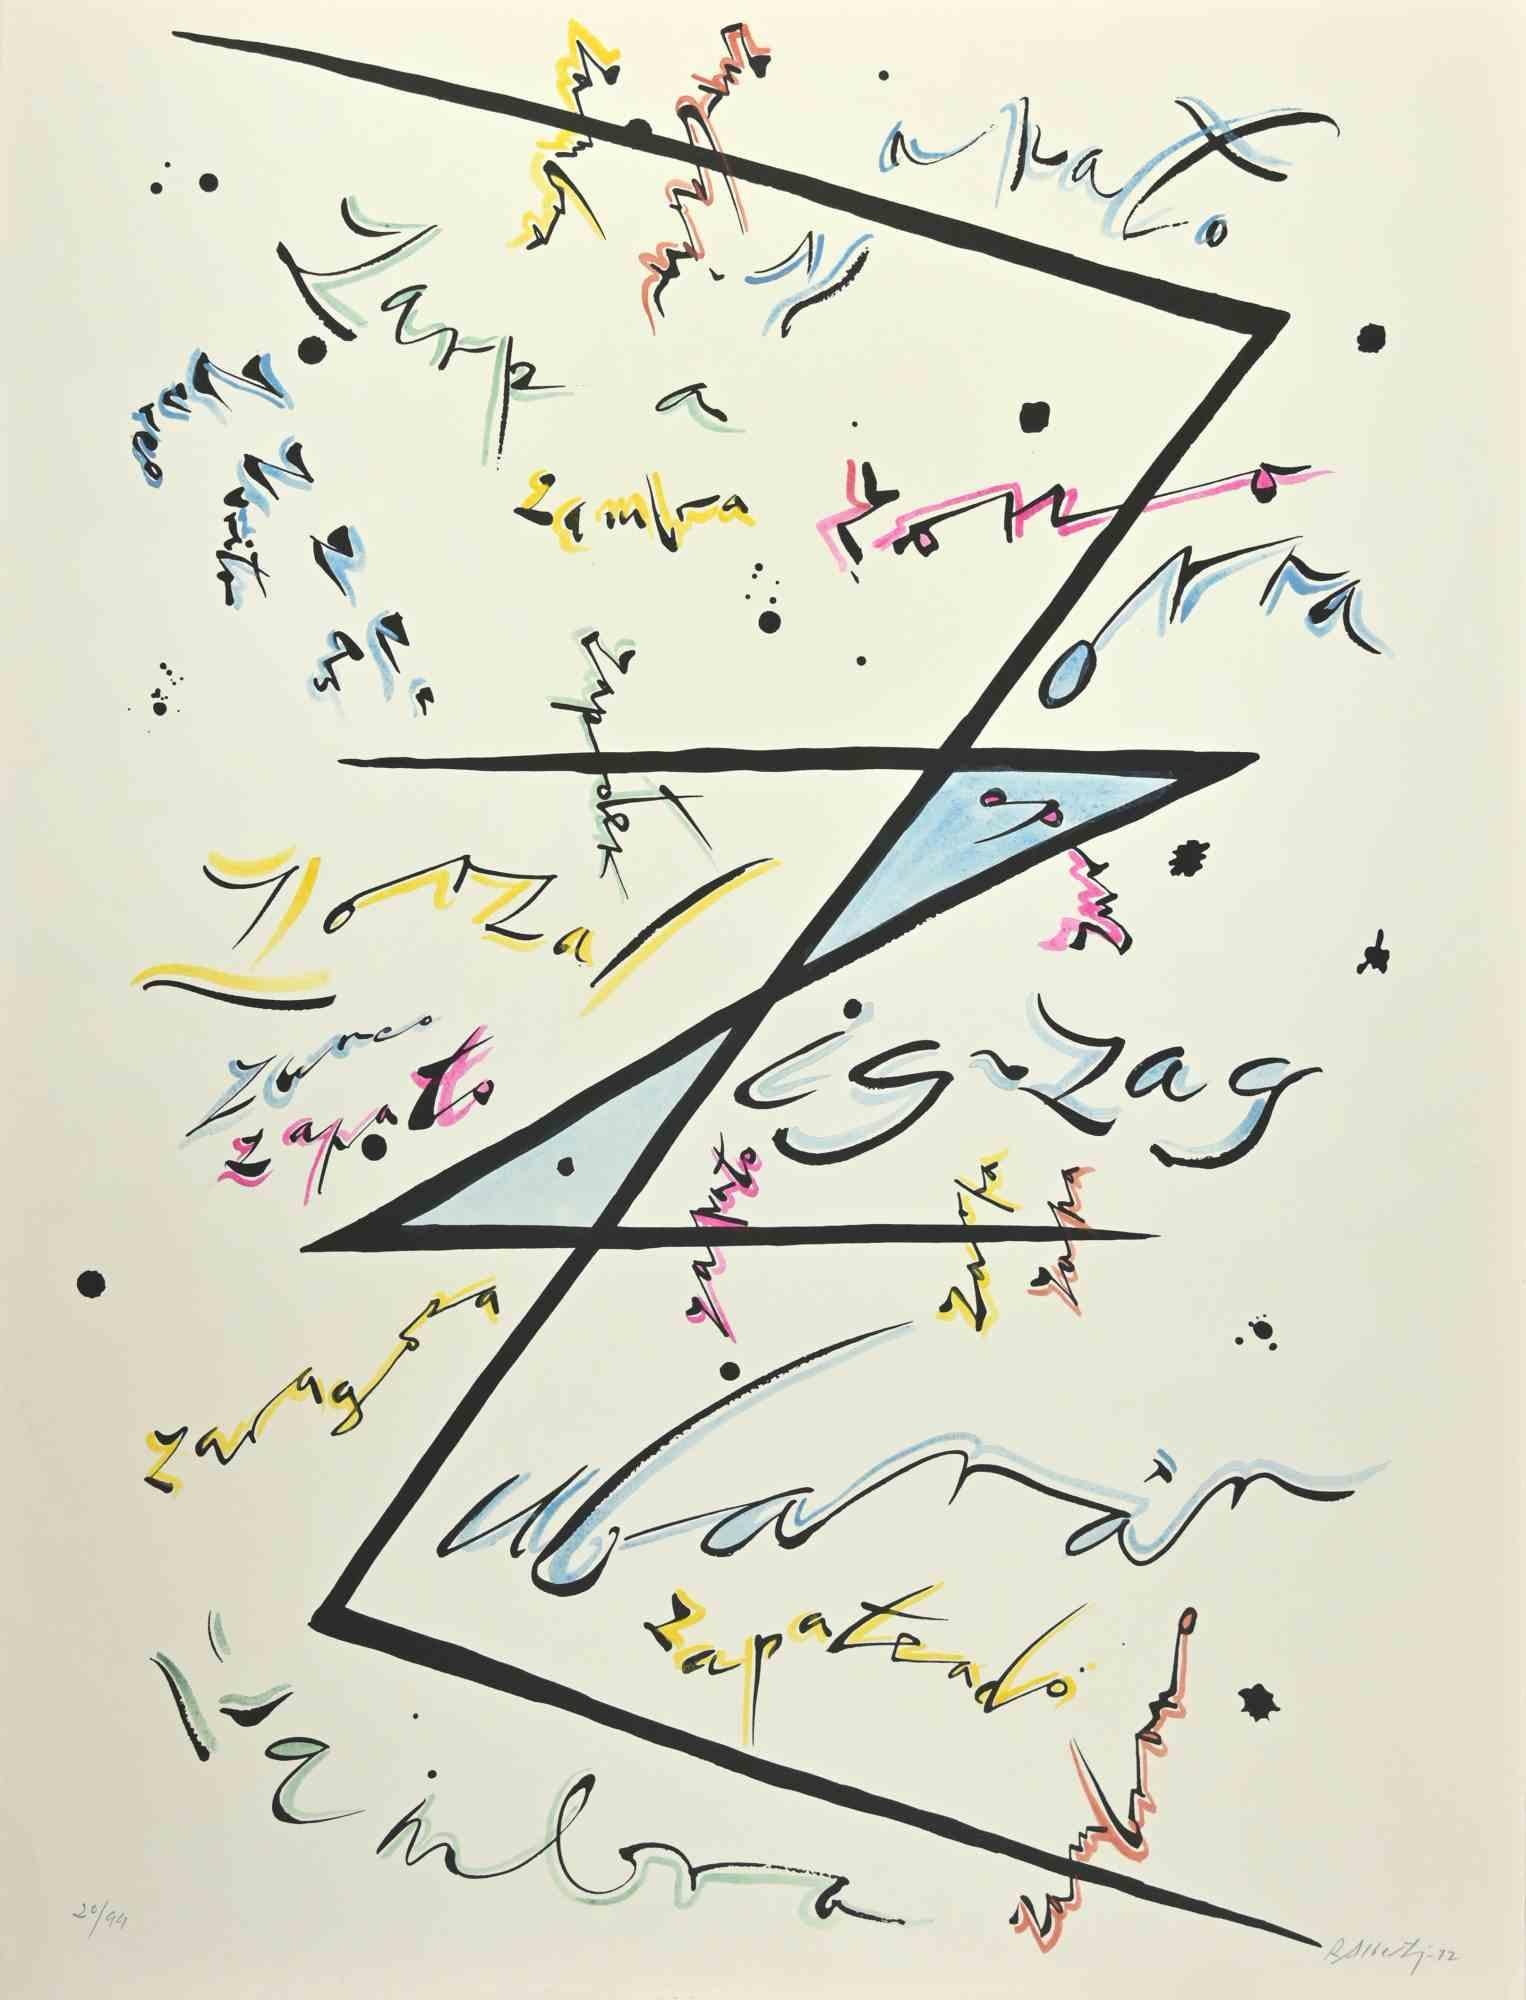 Letter Z from the Alphabet series is a lithograph realized by Rafael Alberti in 1972.

Hand-signed.

Edition n. 20/44 prints.

The state of preservation is very good.

The artwork represents the alphabet letter, with a poetical abstract composition